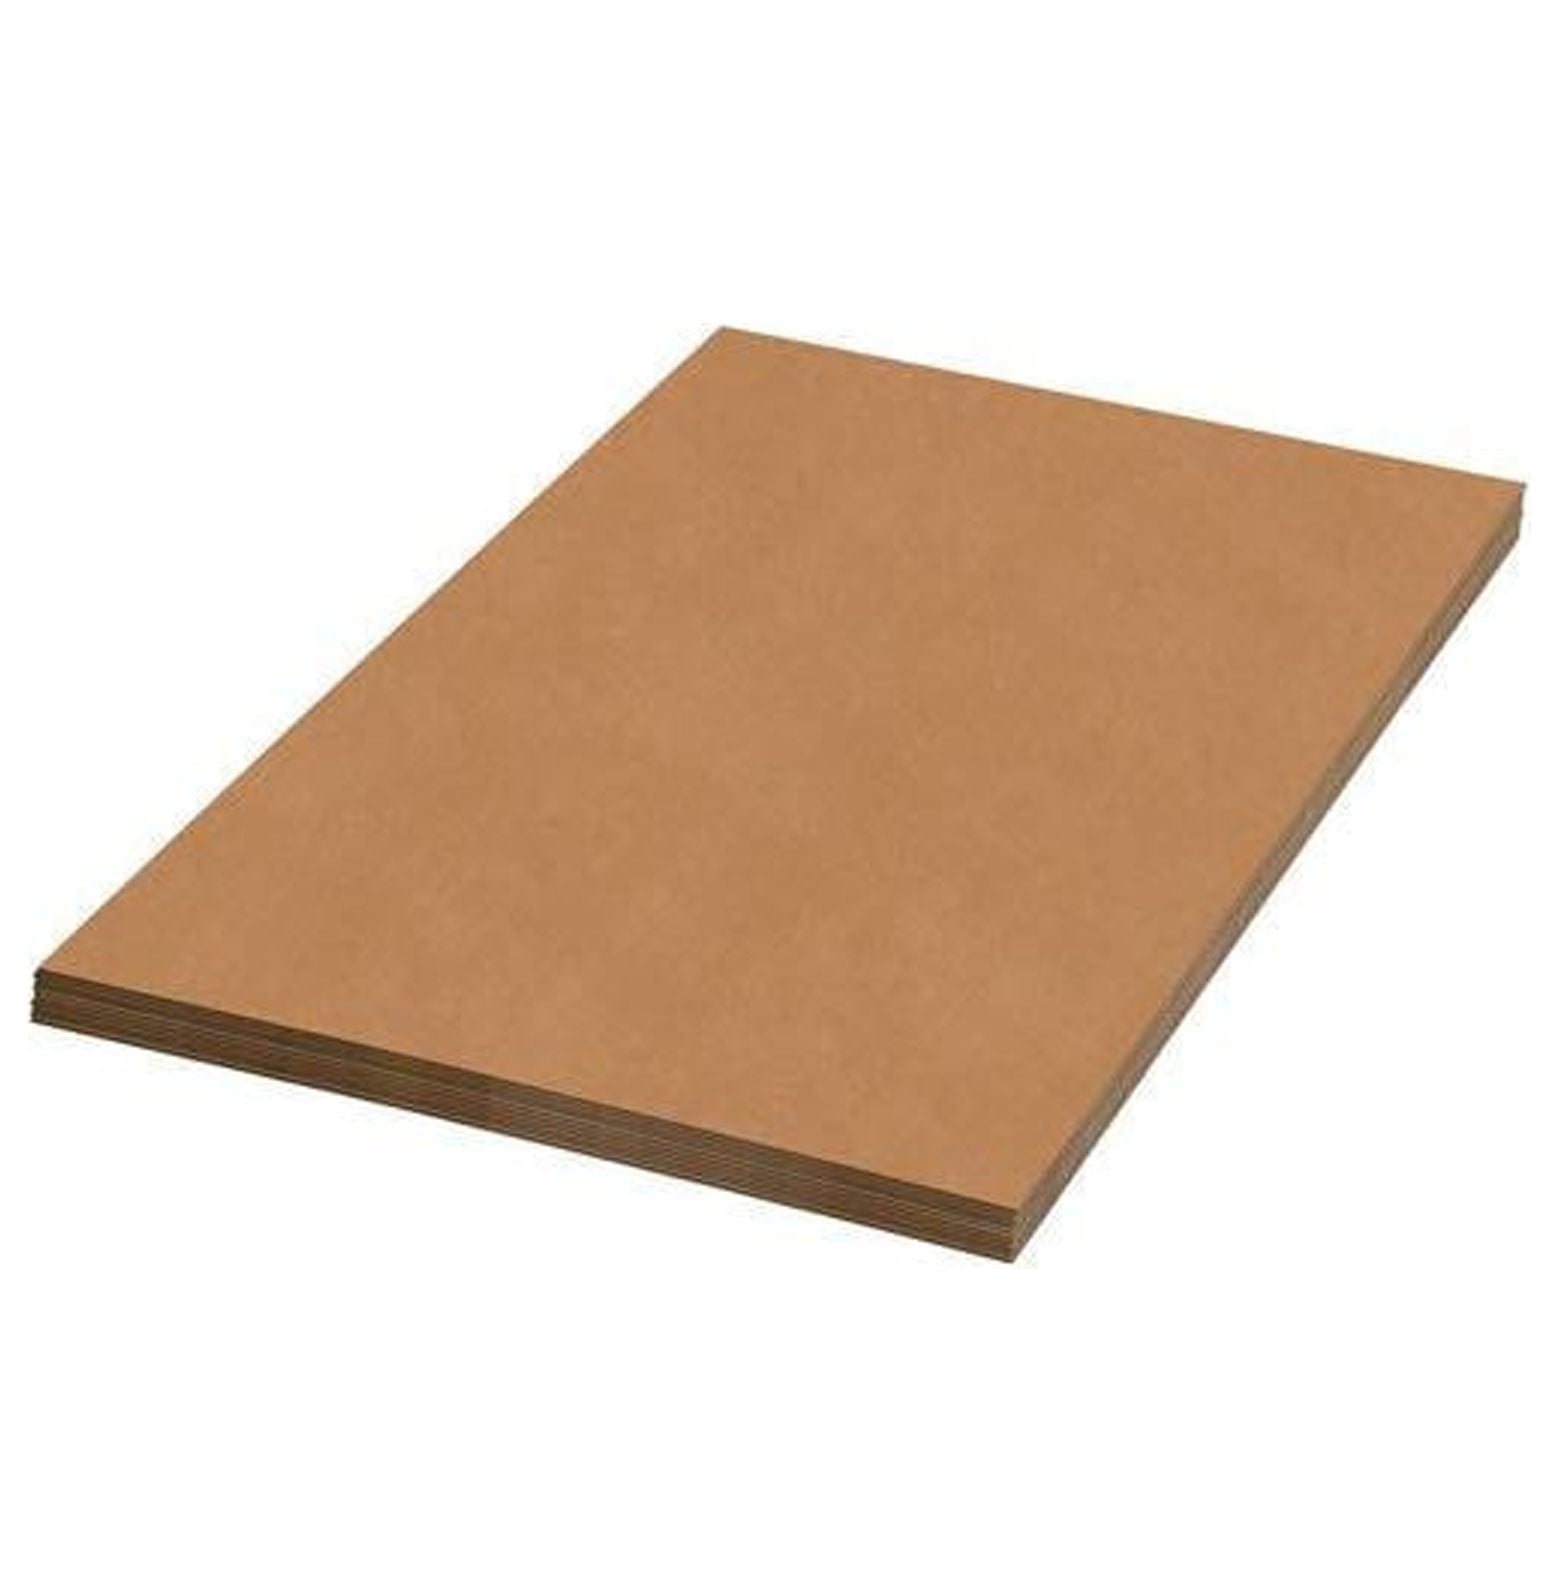 25 Pieces 11 x 8.7 Corrugated Cardboard Sheets Flat Cardboard Brown 2mm Thick